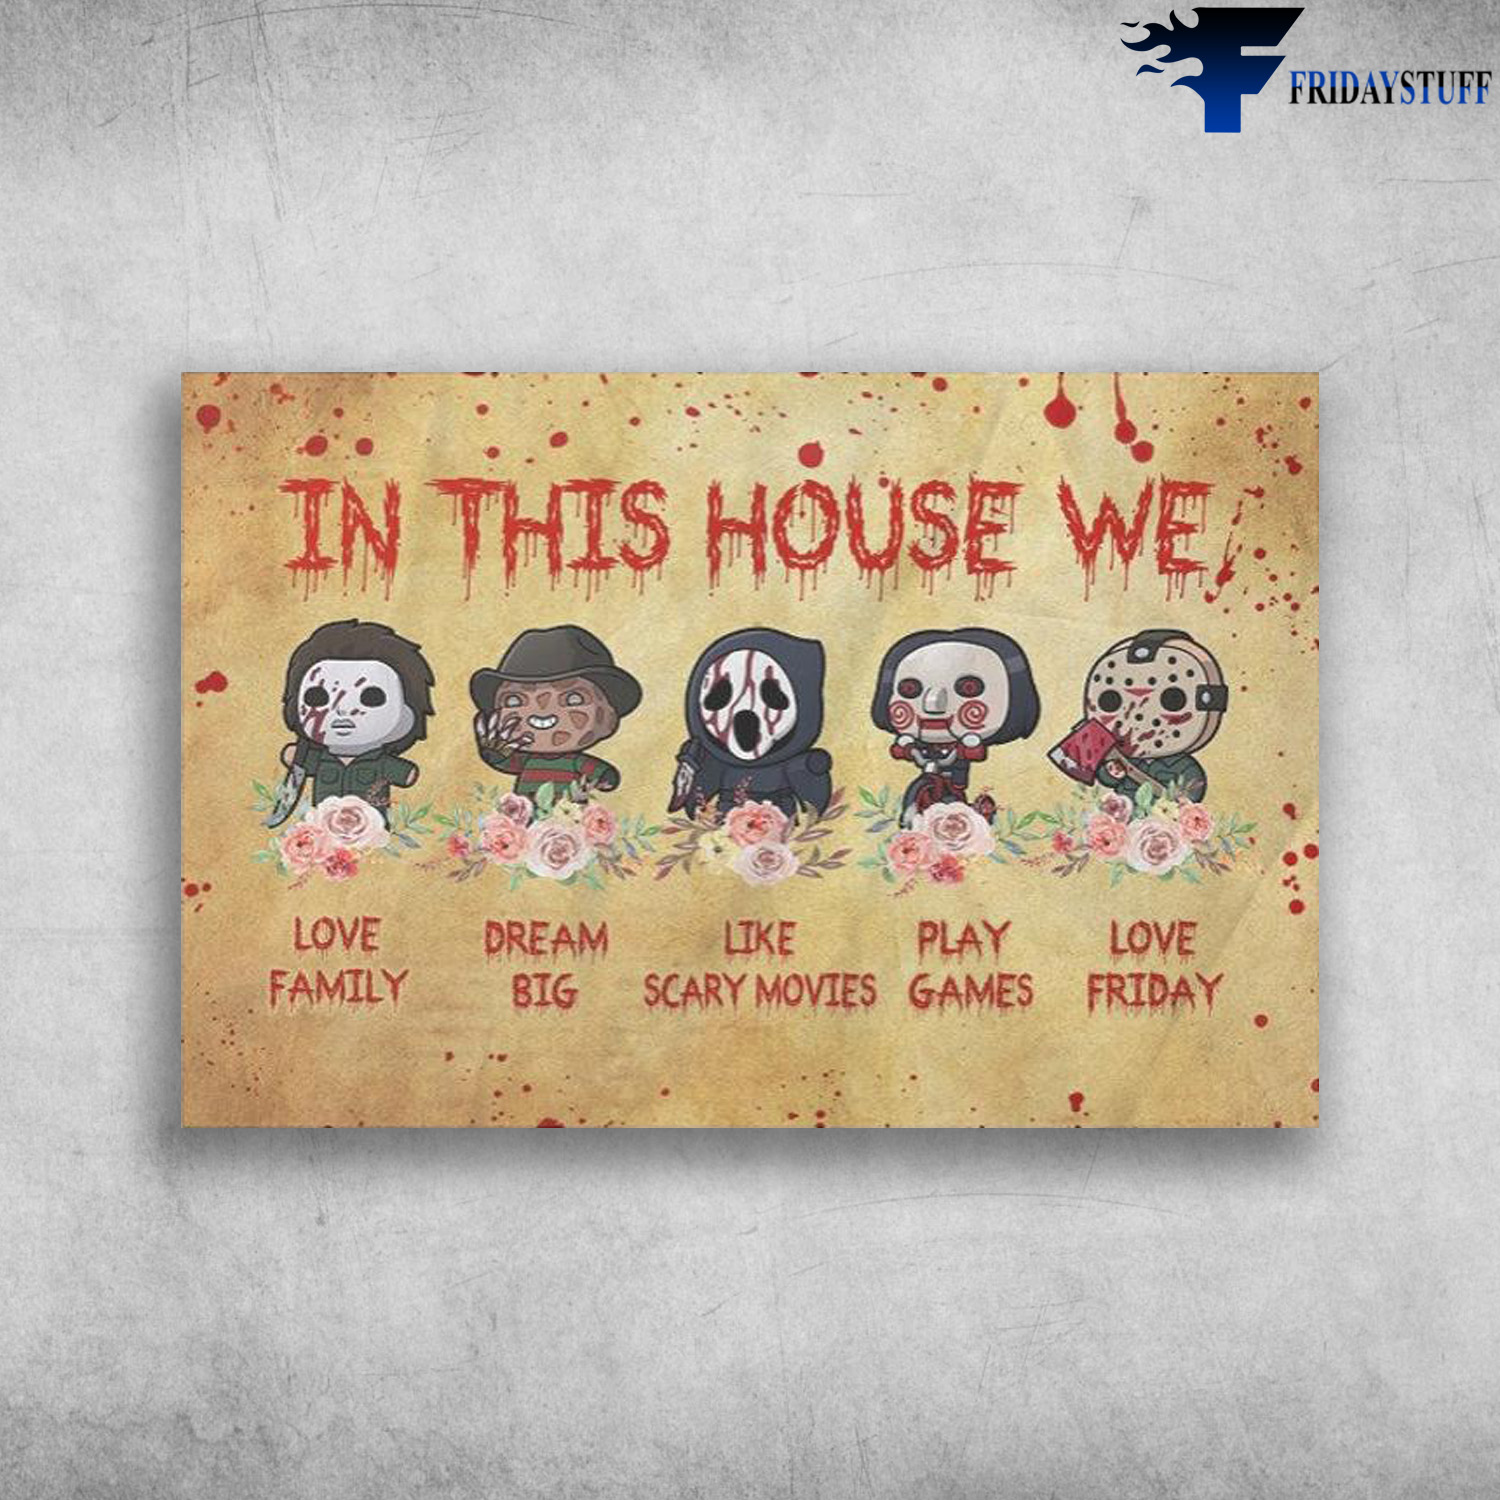 Horror Movies - In This House We Love Family, Dream Big, Like Scary Movies, Play Games, Love Friday